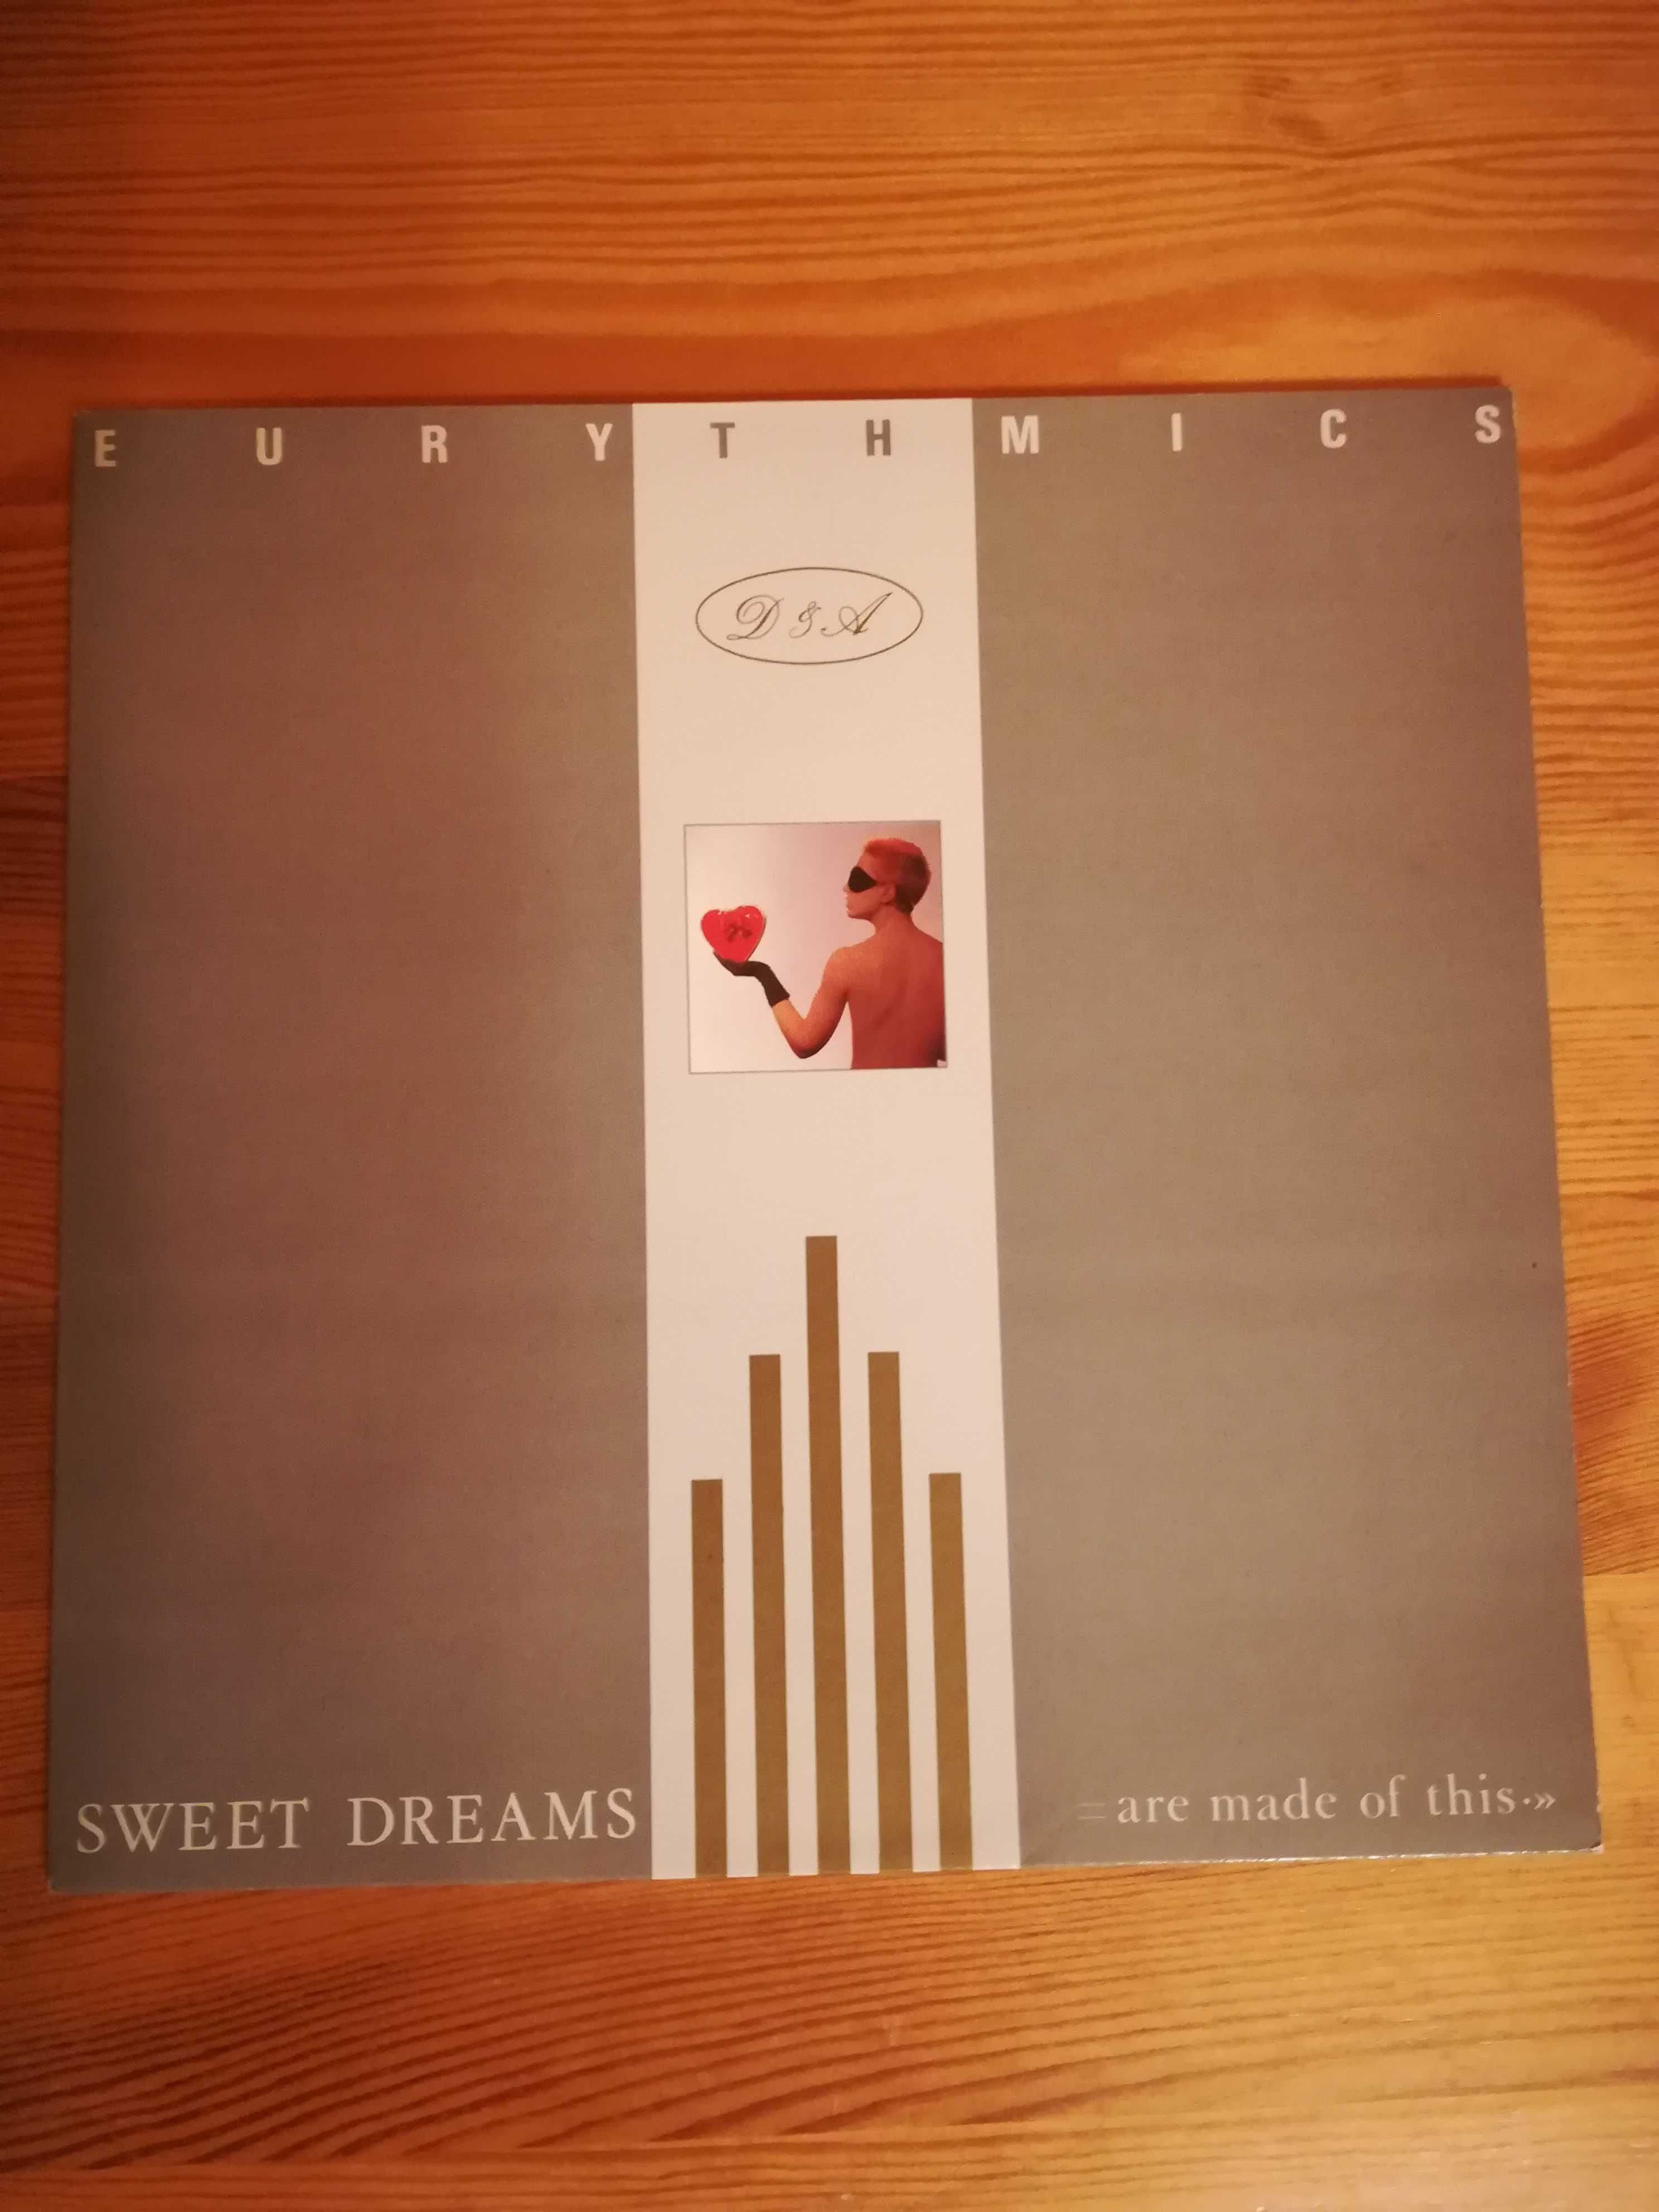 Eurythmics Sweet Dreams (Are Made Of This) LP pierw. wyd. GER 1983 EX